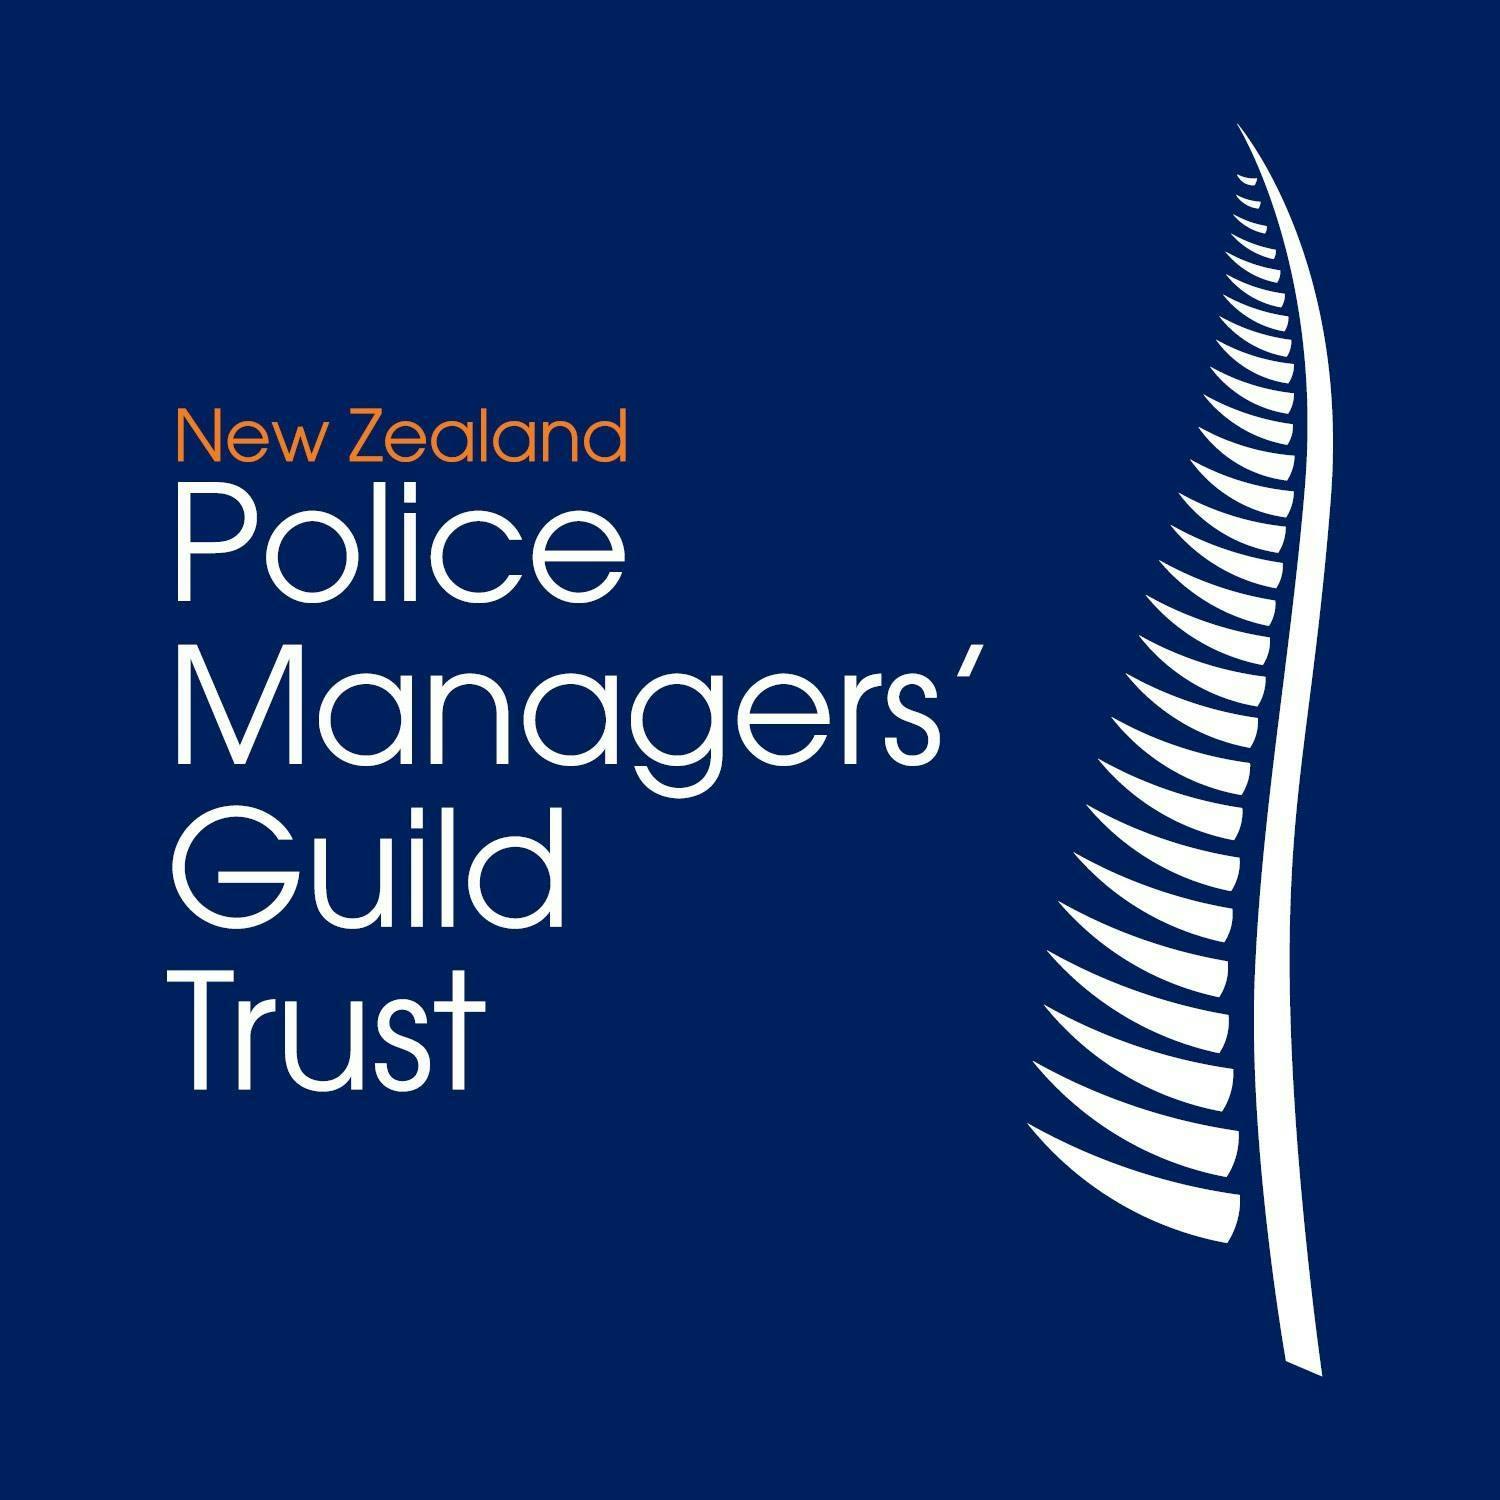 Police Managers Guild Trust